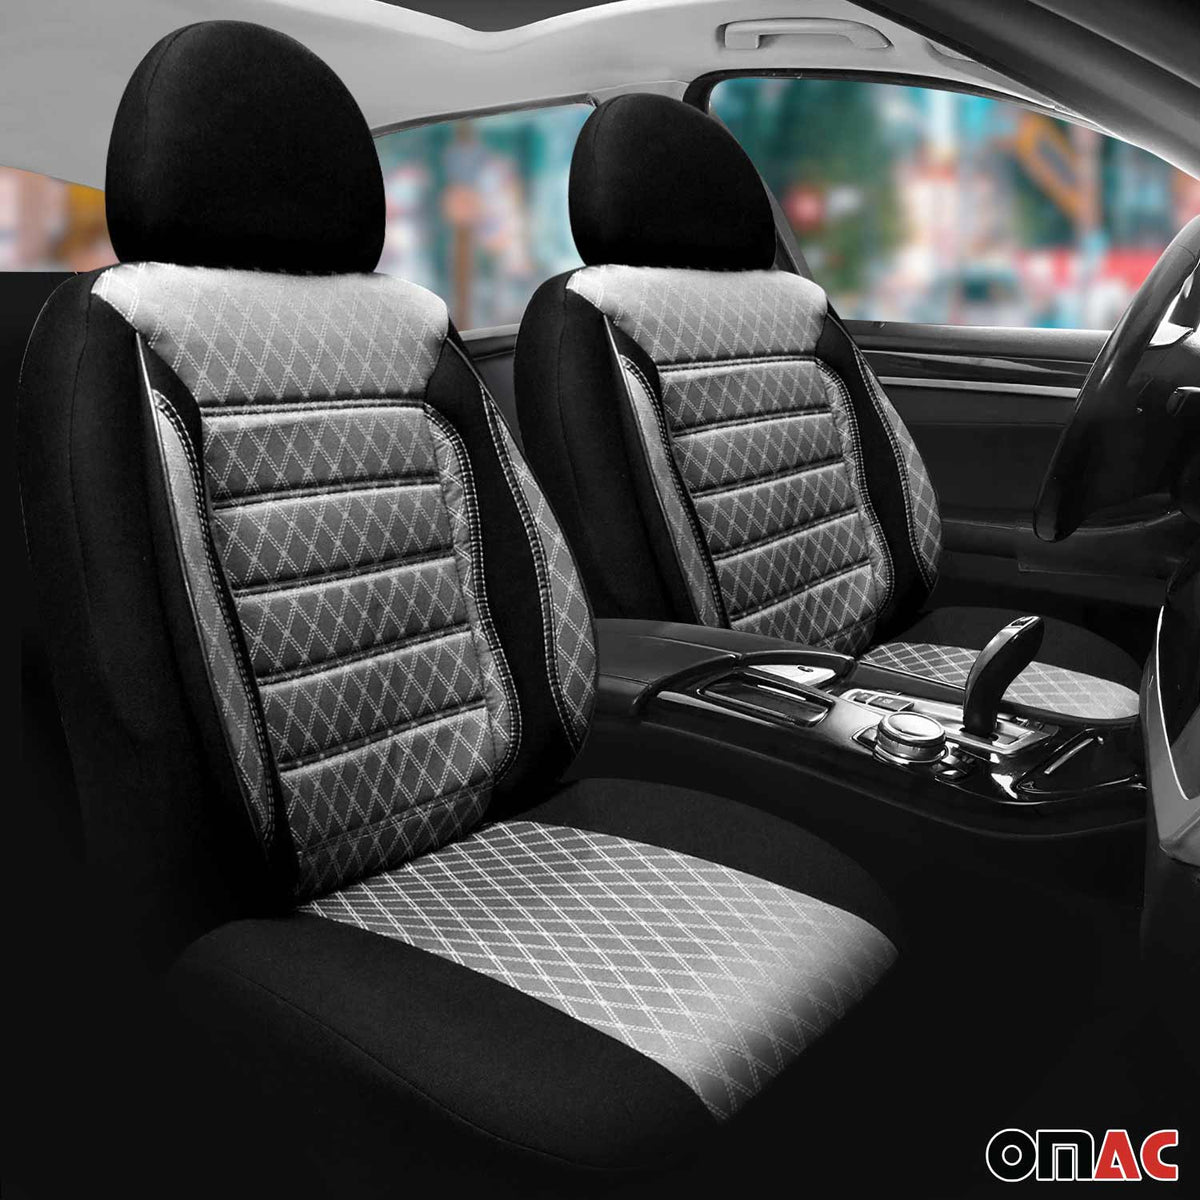 Seat covers protective covers for BMW X1 X2 X3 gray black 2 seat front set